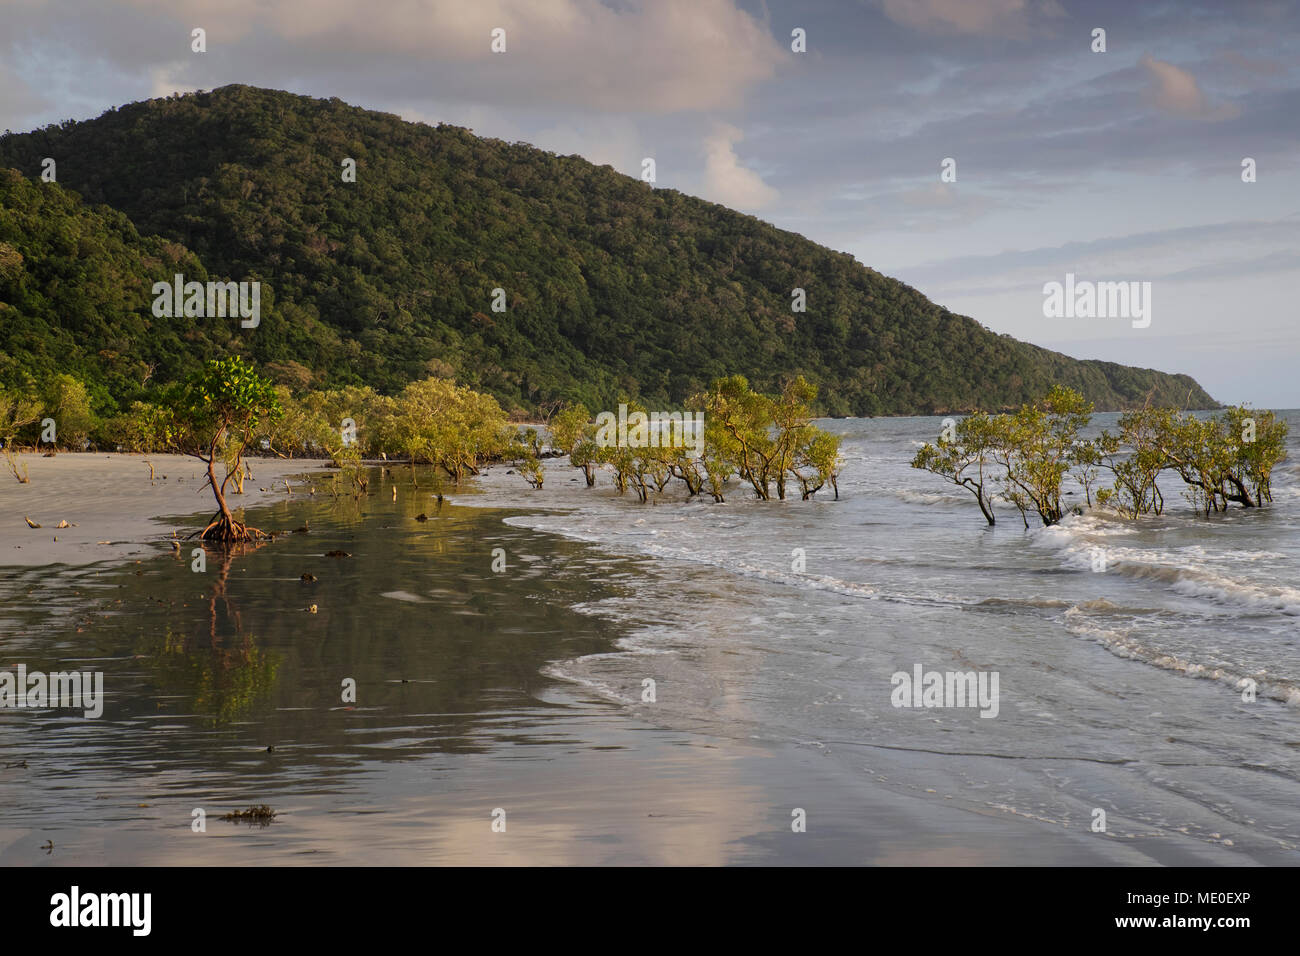 Mangrove trees in surf on beach at Cape Tribulation in the Daintree National Park in Queensland, Australia Stock Photo